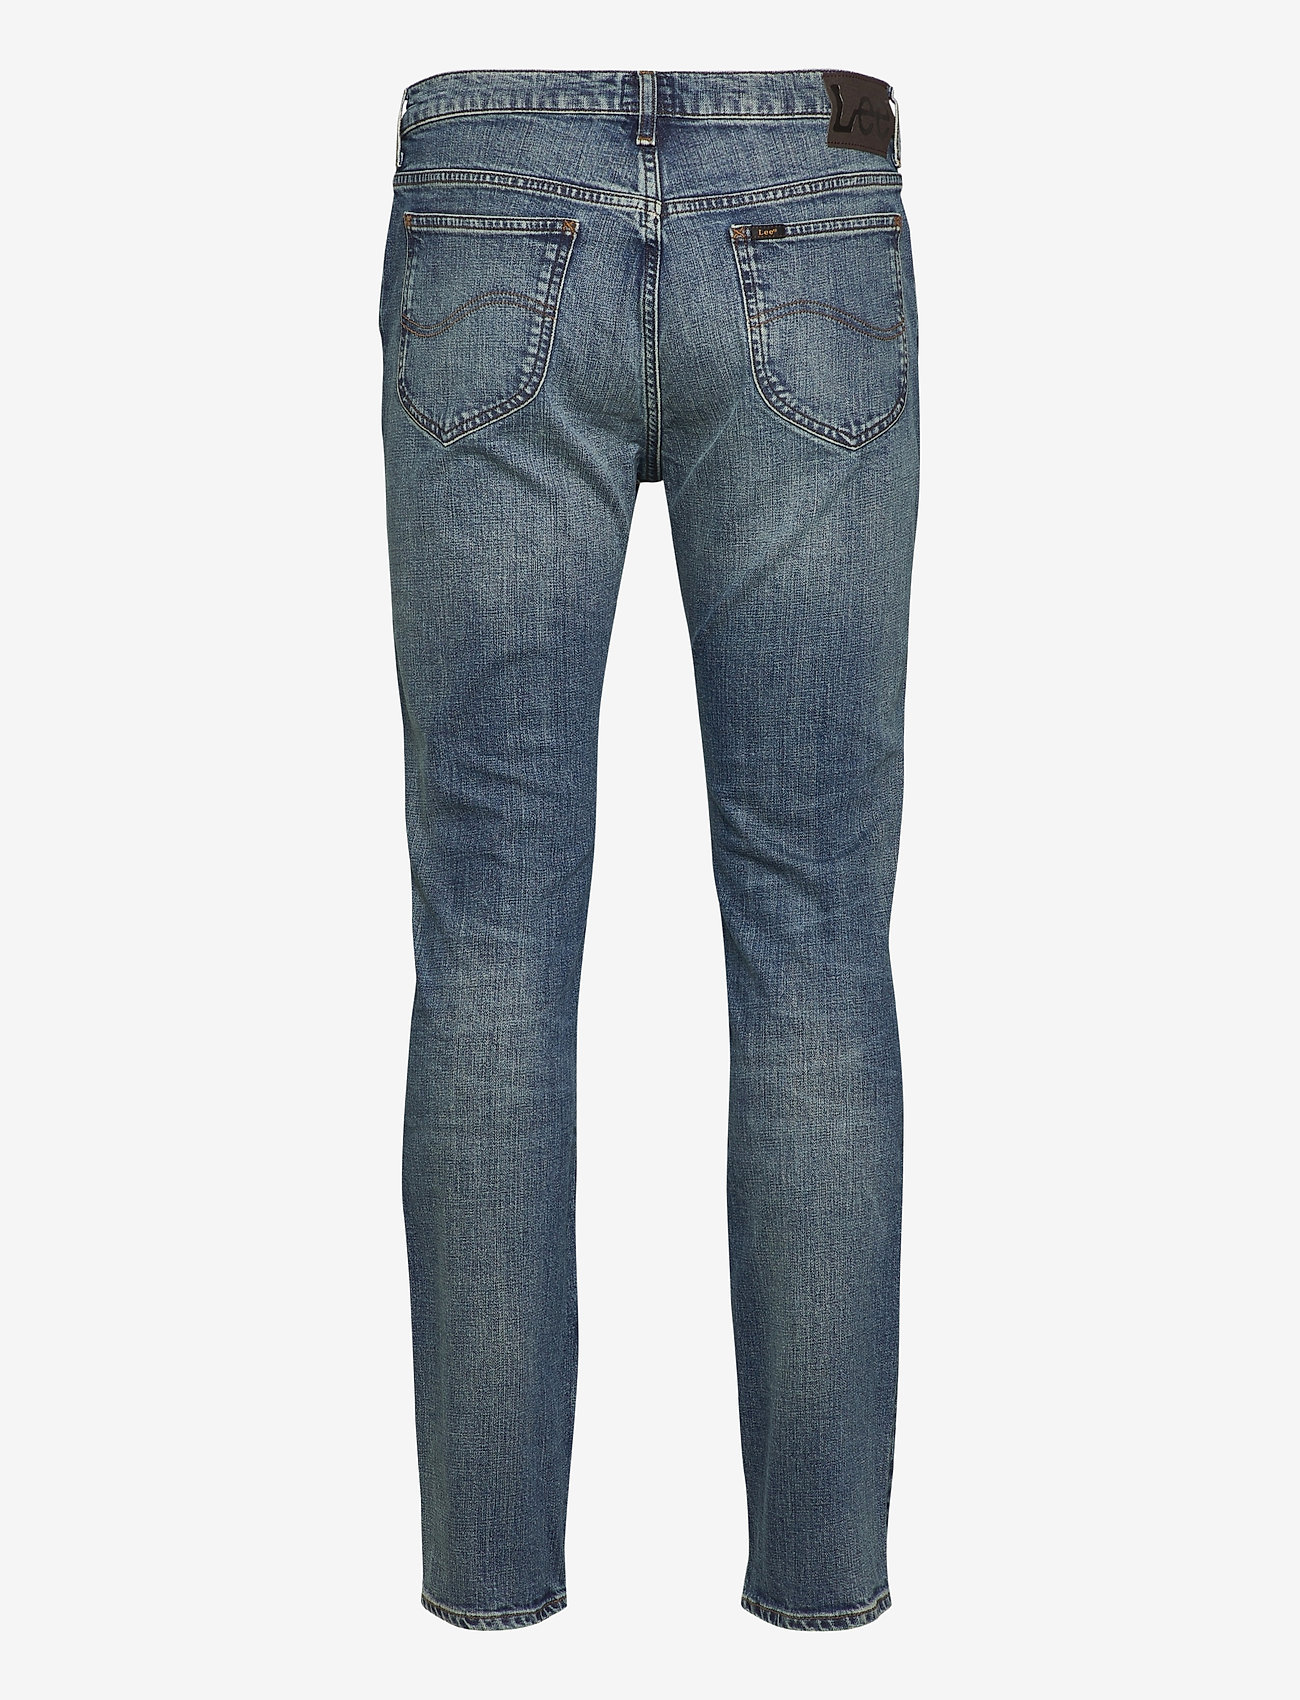 lee easy rider jeans